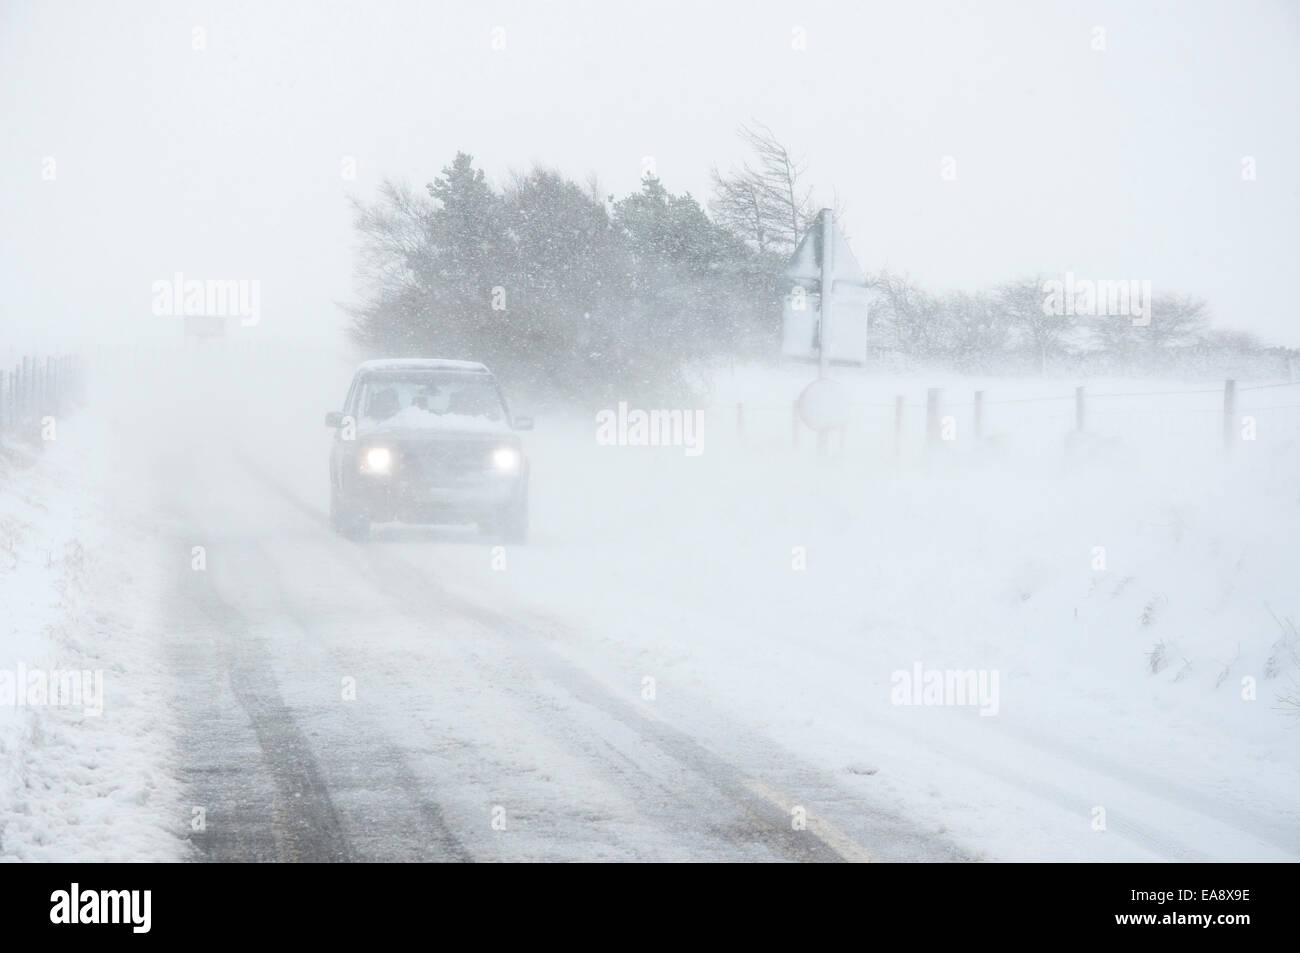 A car in blizzard conditions driving down Monks road with headlights on. Wind blowing snow across road. Stock Photo